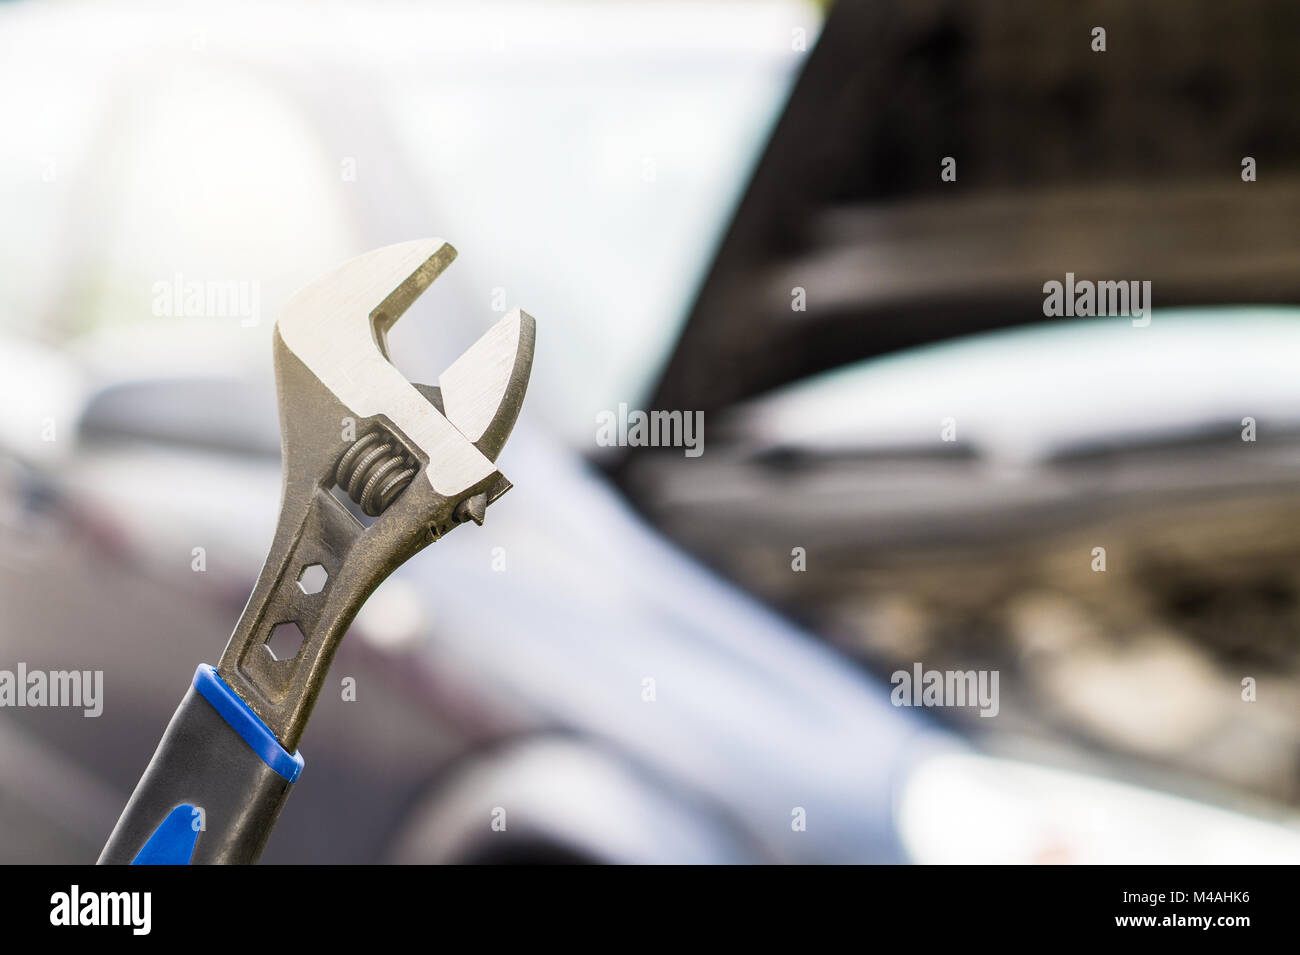 Car repair, maintenance and vehicle inspection concept. Wrench and a car with under the hood and engine view. Selective focus to fixing tool. Stock Photo